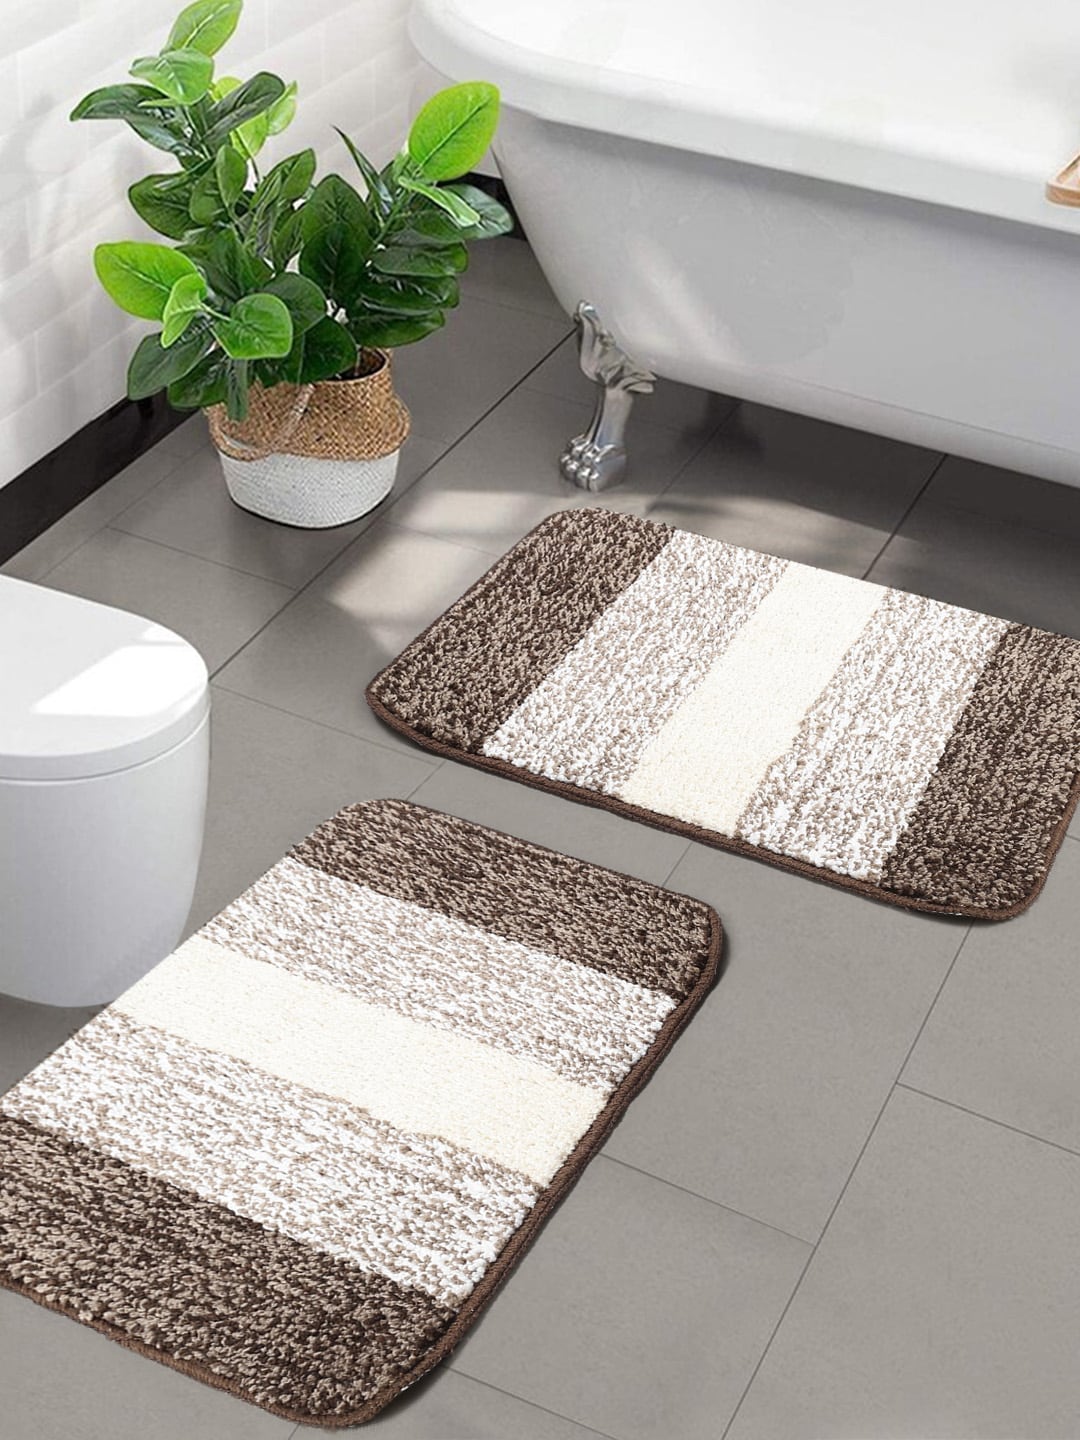 Saral Home Pack Of 2 Brown & Beige Striped Anti-Skid Bath Mats Price in India